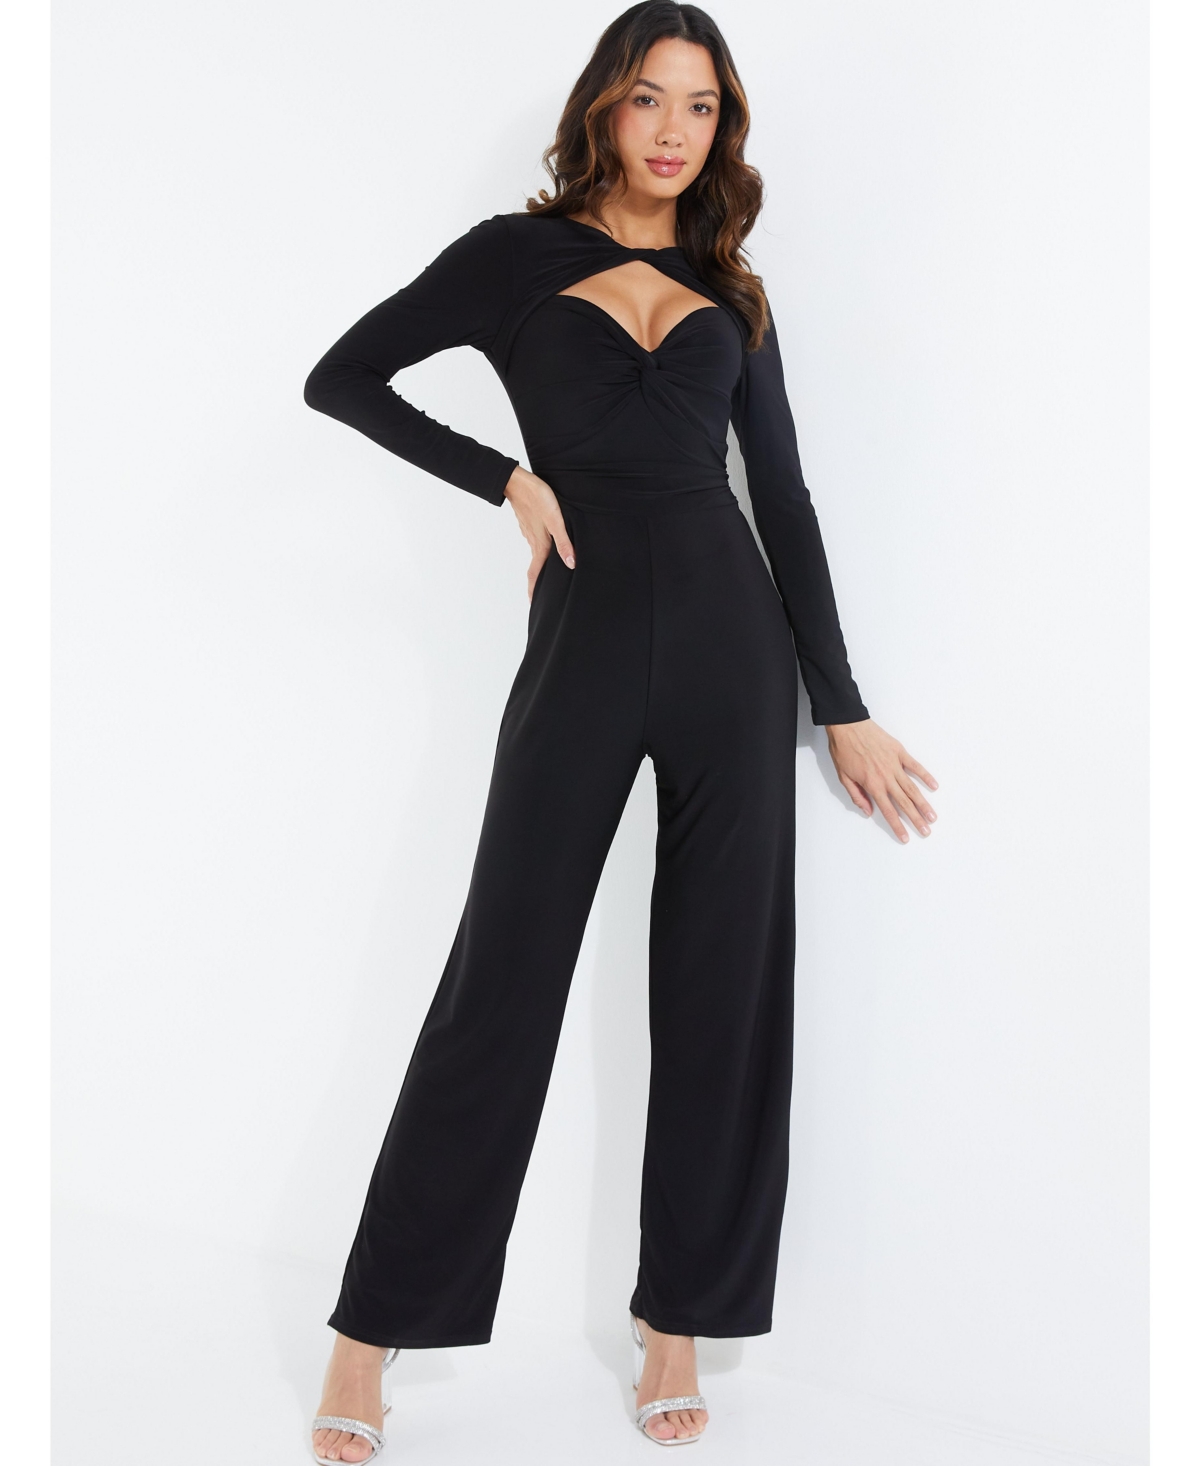 QUIZ WOMEN'S ITY JUMPSUIT WITH KEYHOLE NECK AND LONG SLEEVES